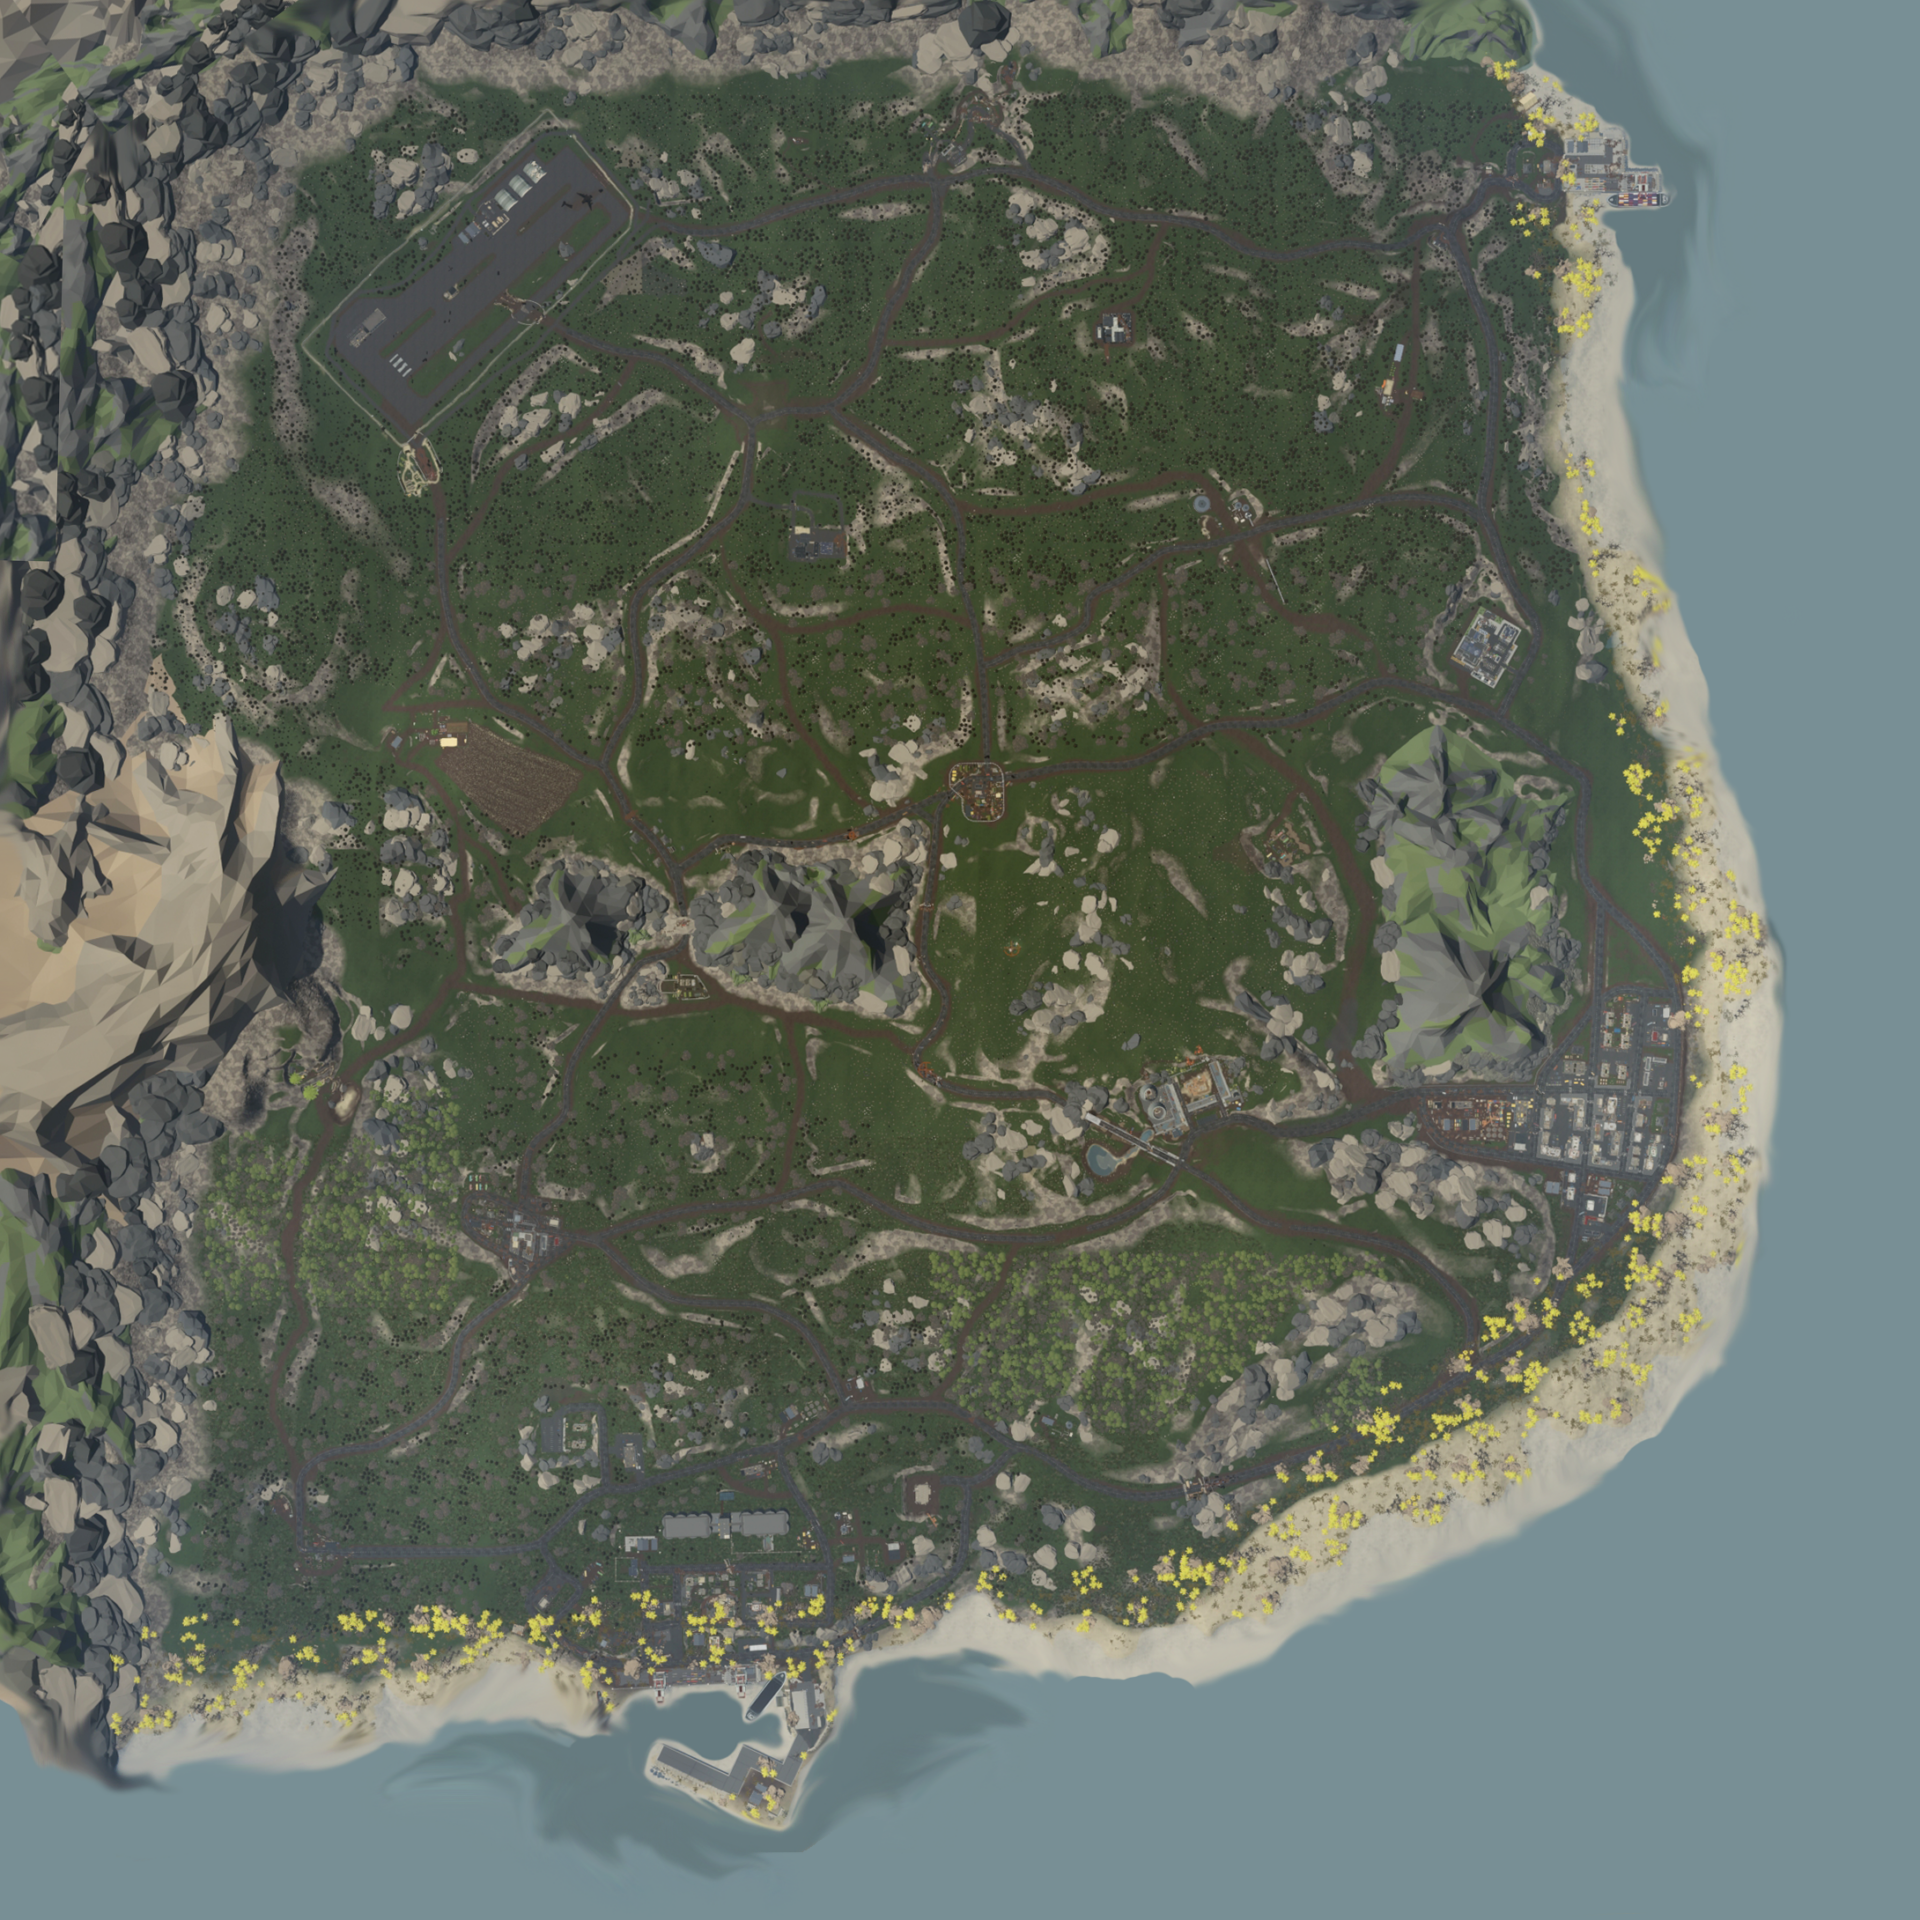 The sky view of the updated island map for Zombie Survival Game Online.